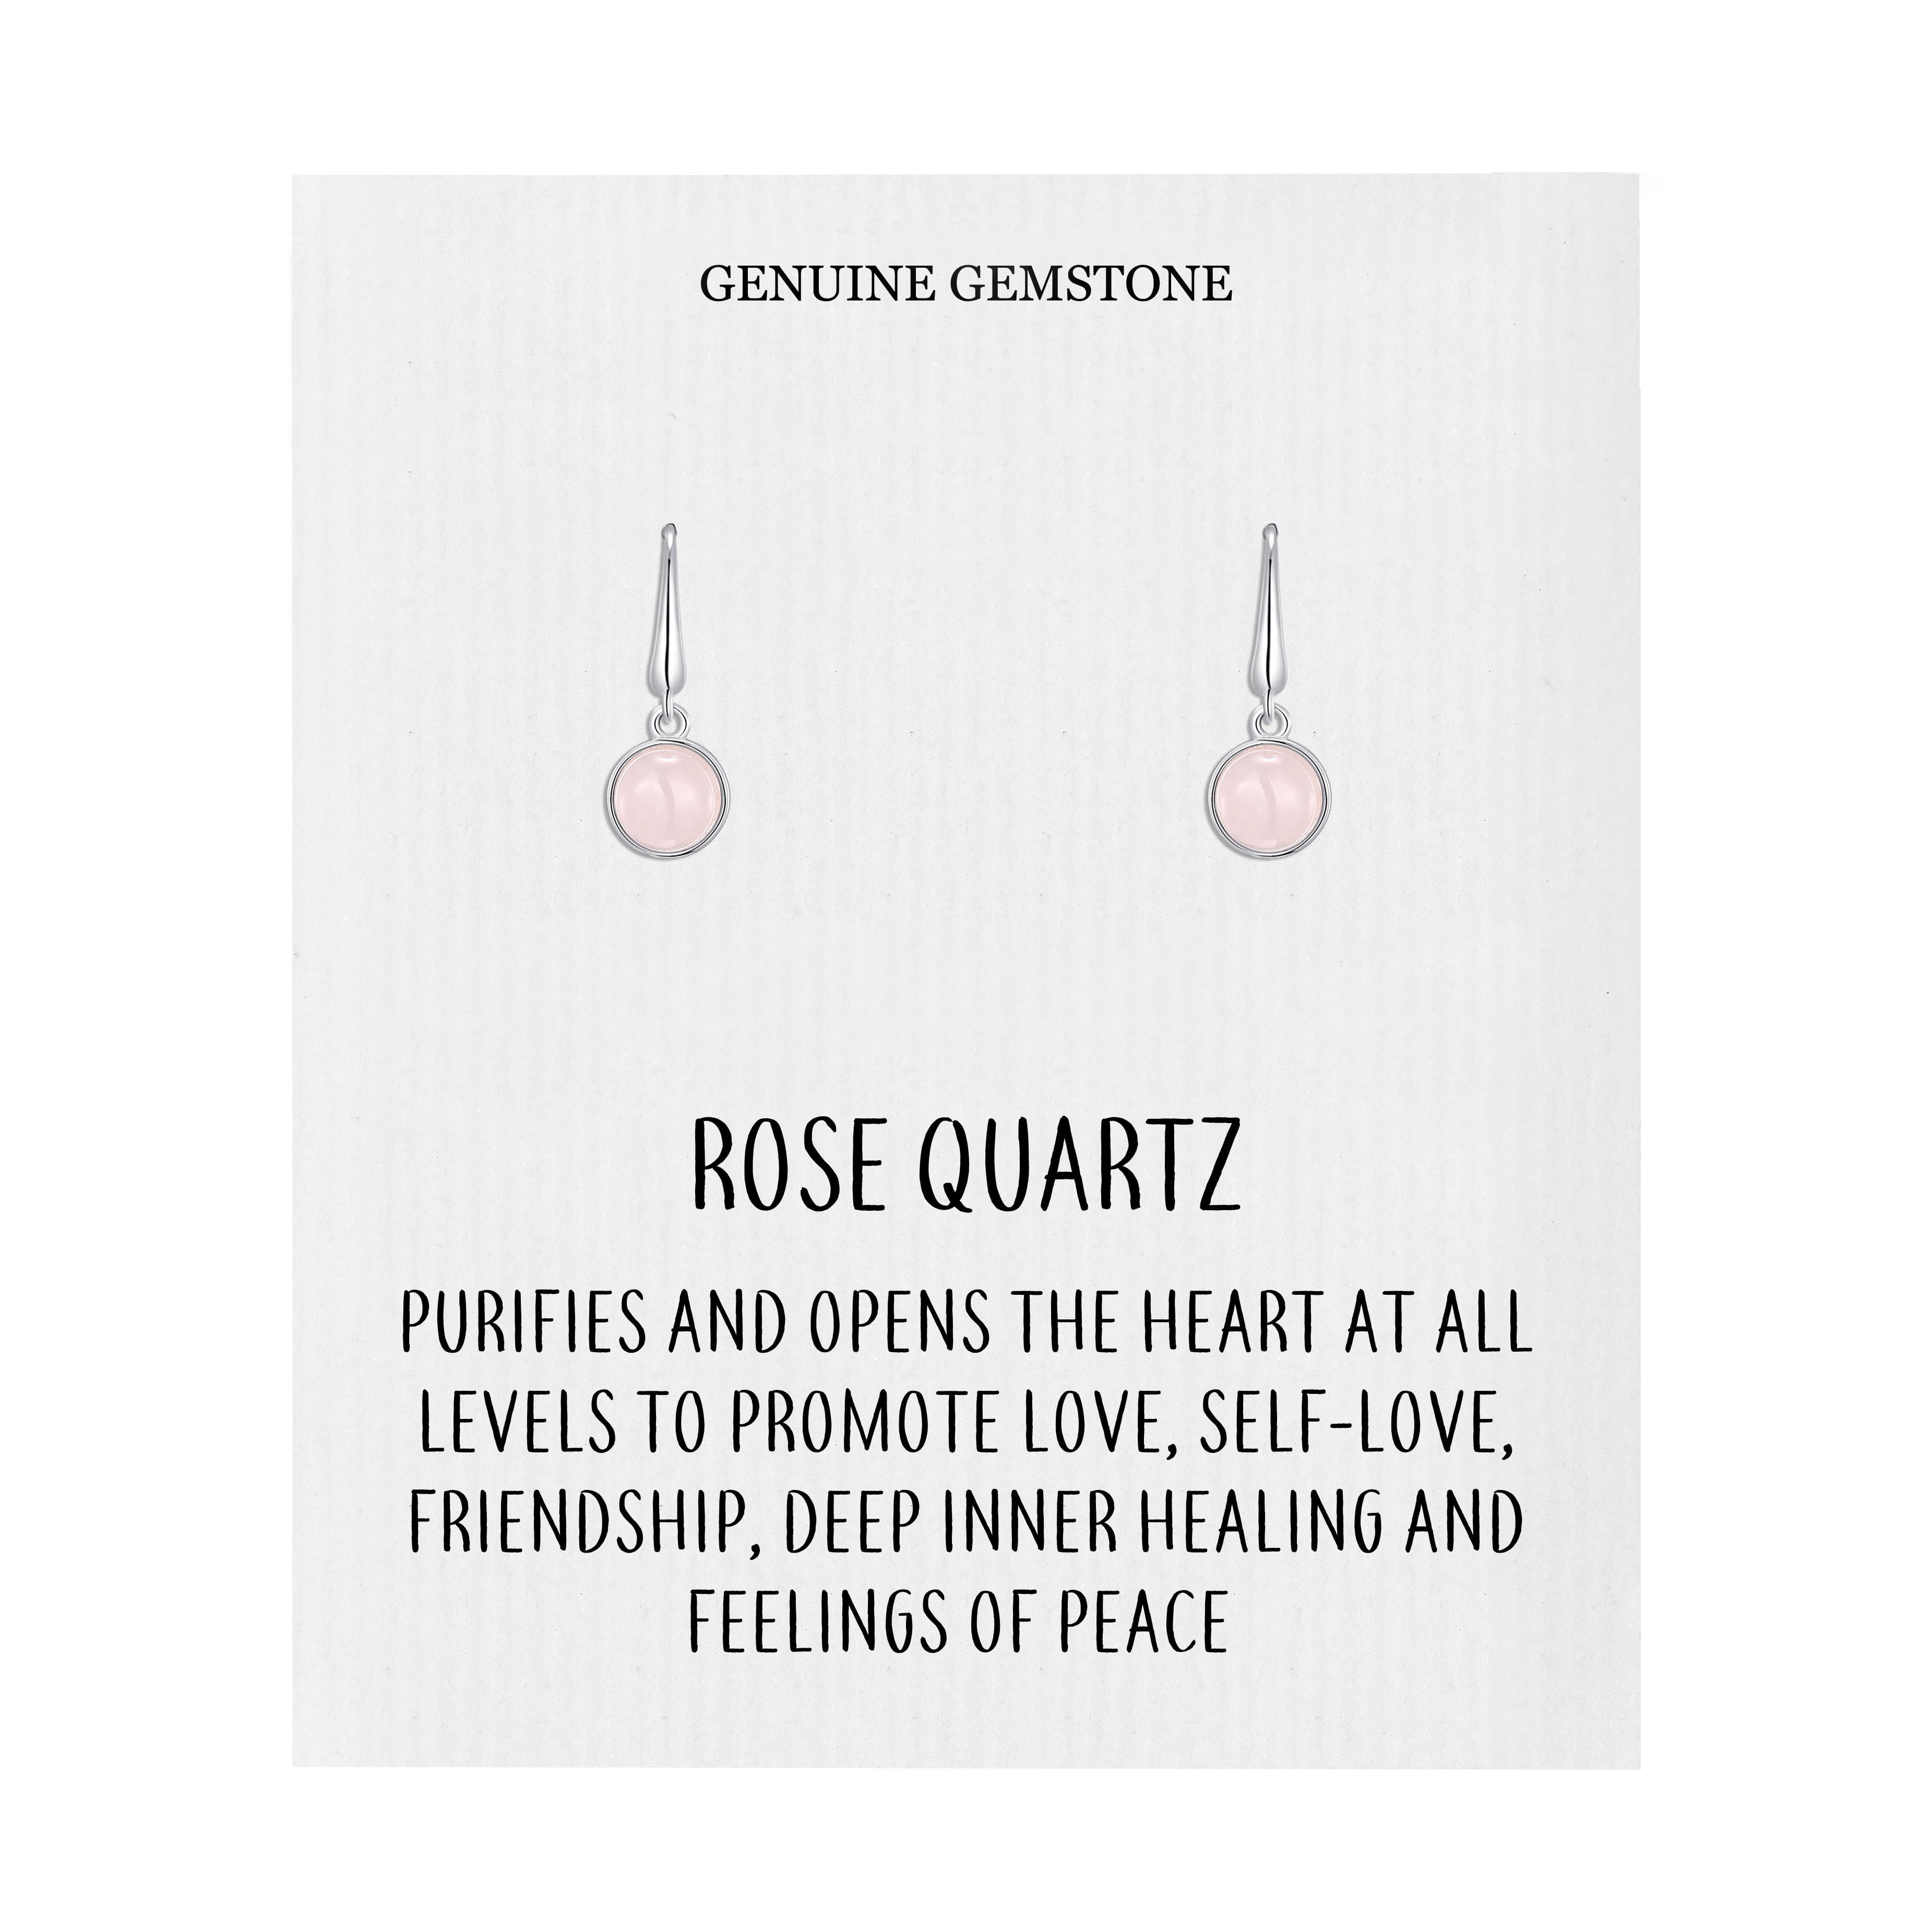 Rose Quartz Drop Earrings with Quote Card by Philip Jones Jewellery